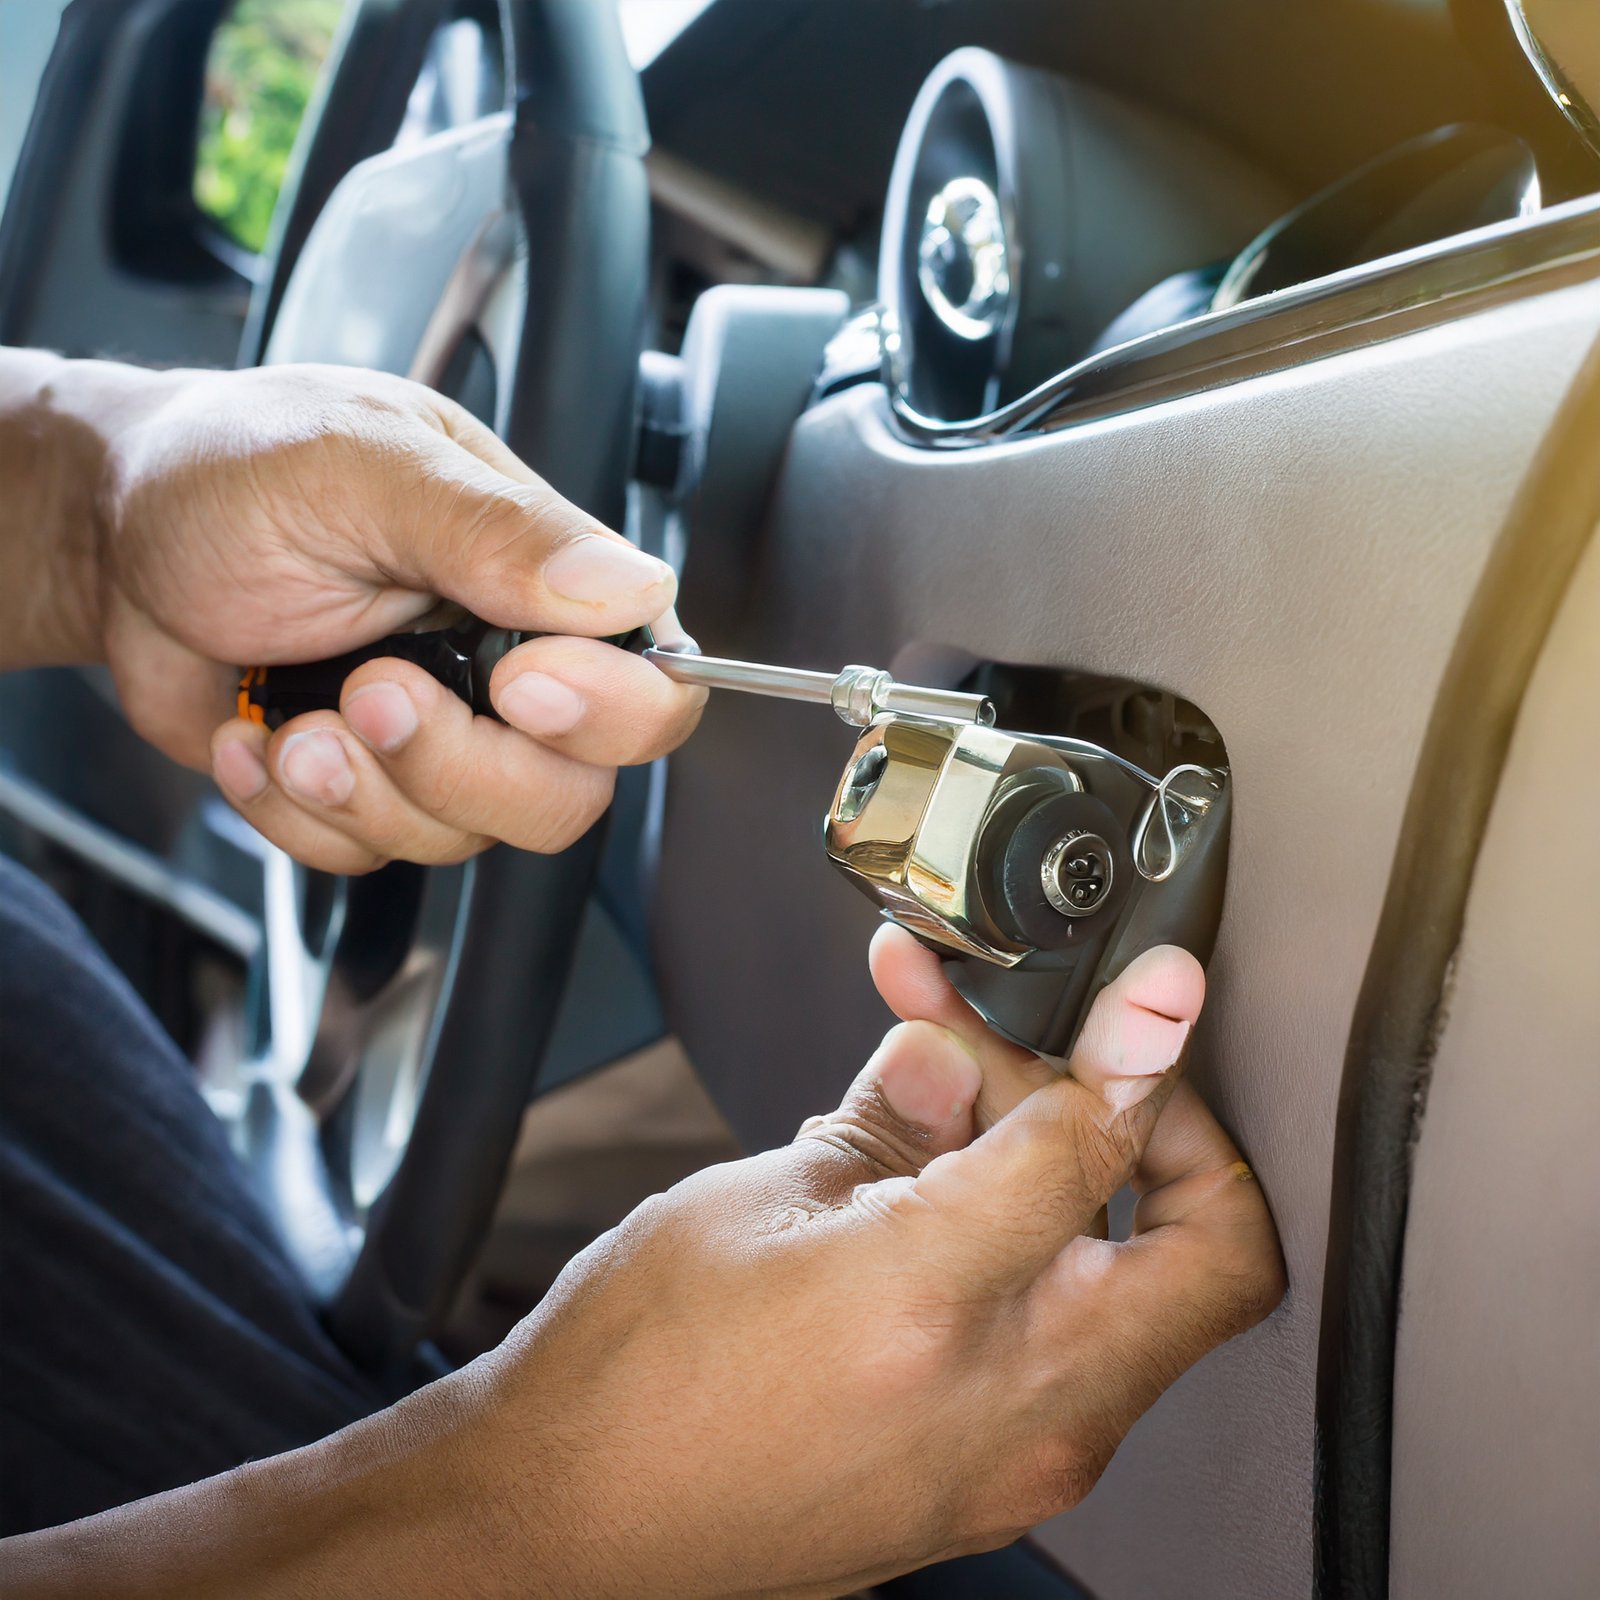 Essential Advice for Selecting the Best Car Locksmith in Irvine